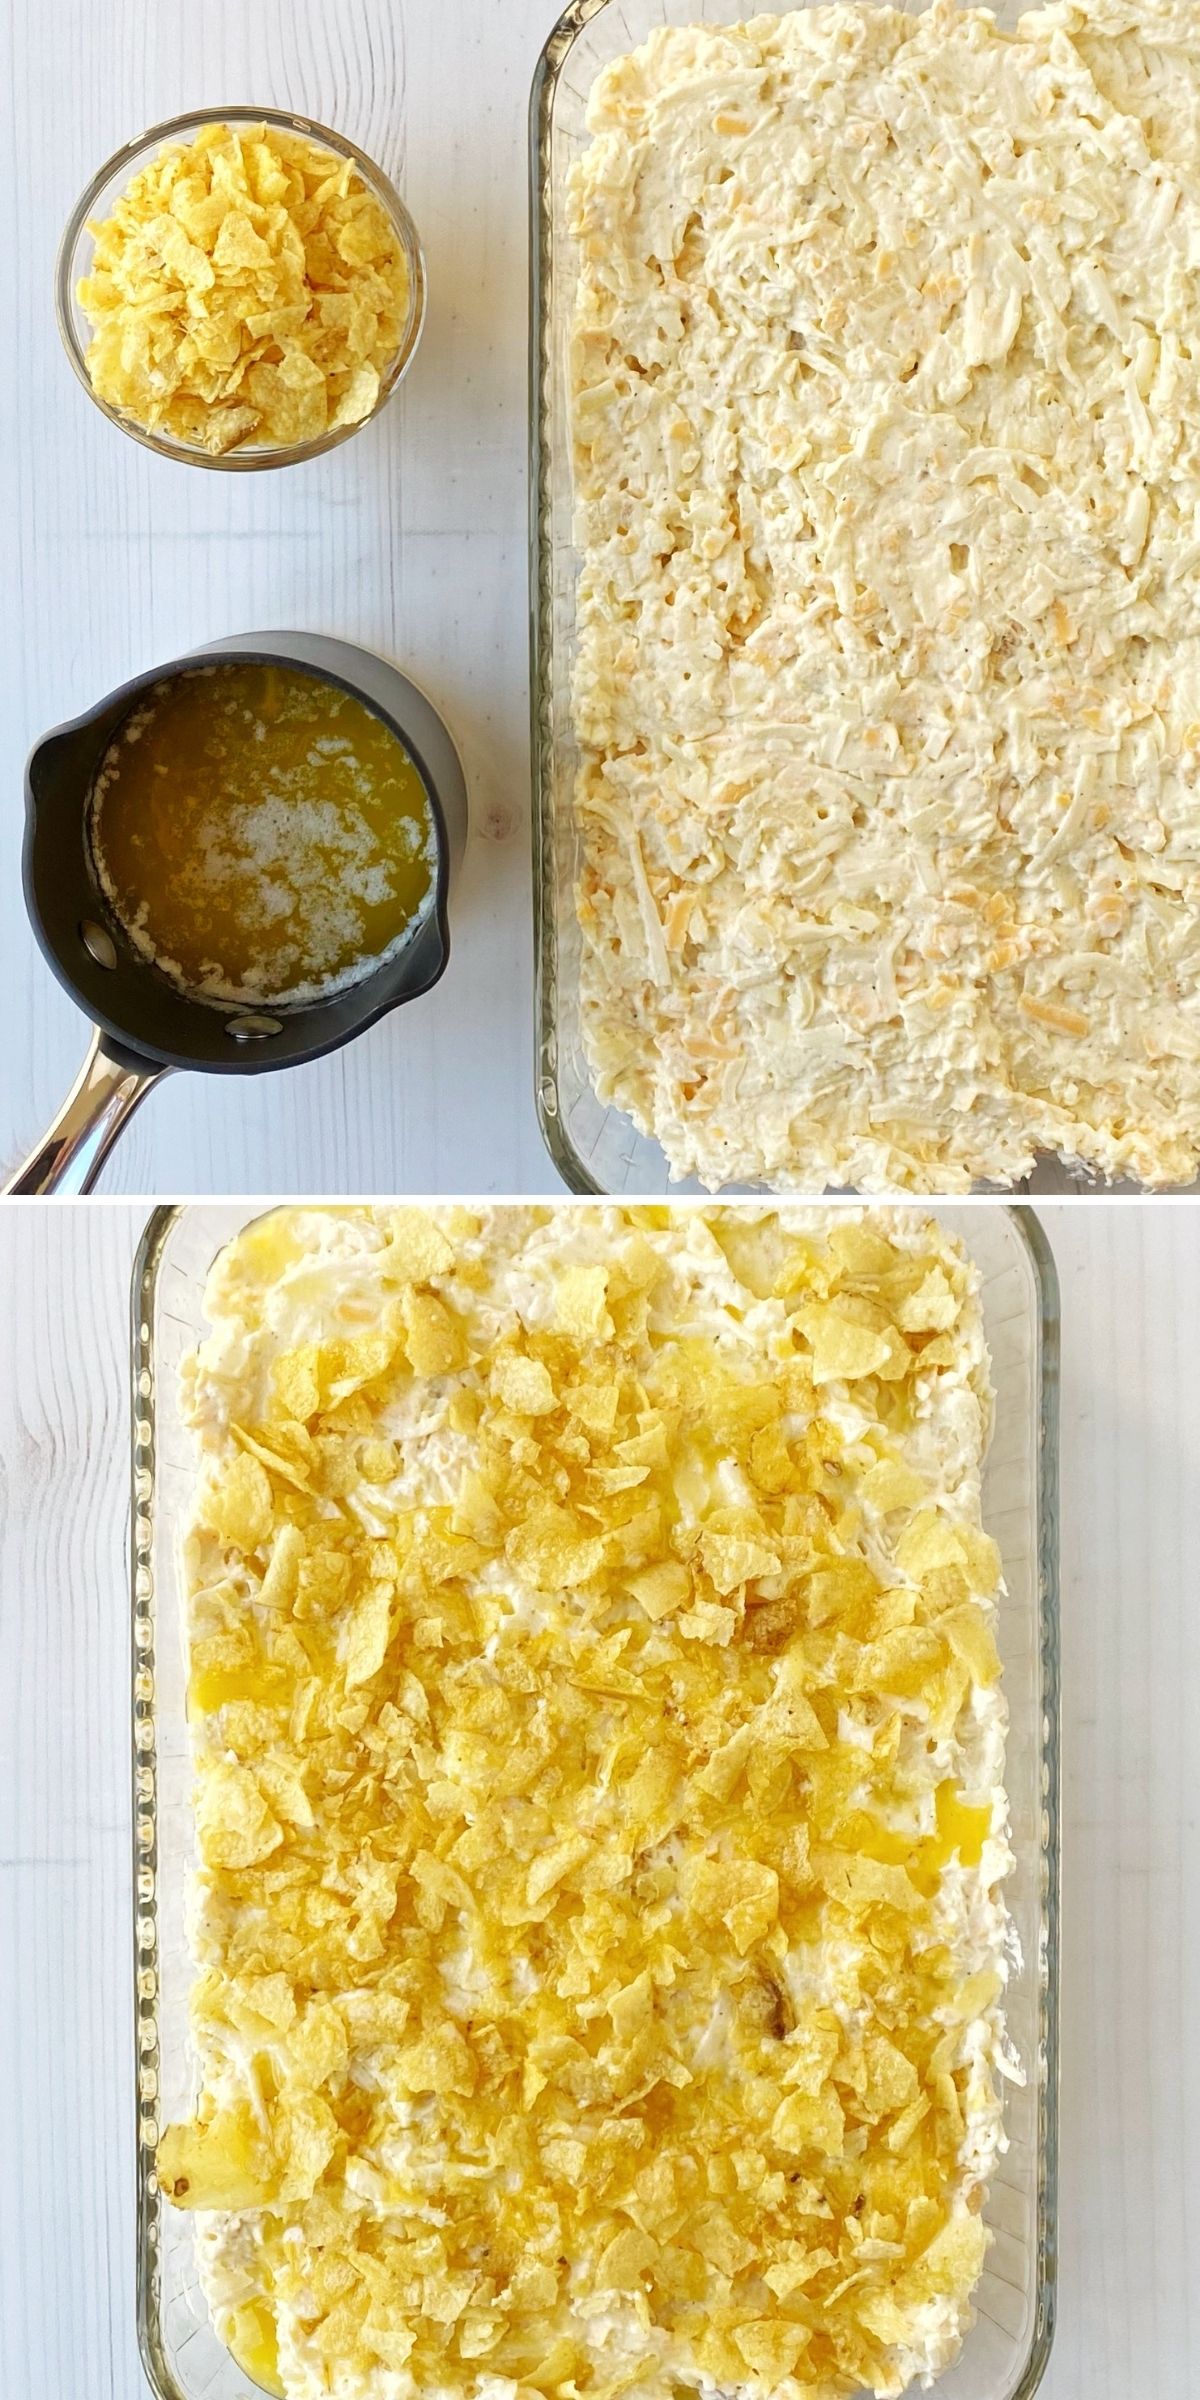 pan of potato mixture with a bowl of crushed potato chips and small pan of melted butter; potato mixture topped with potato chips and melted butter